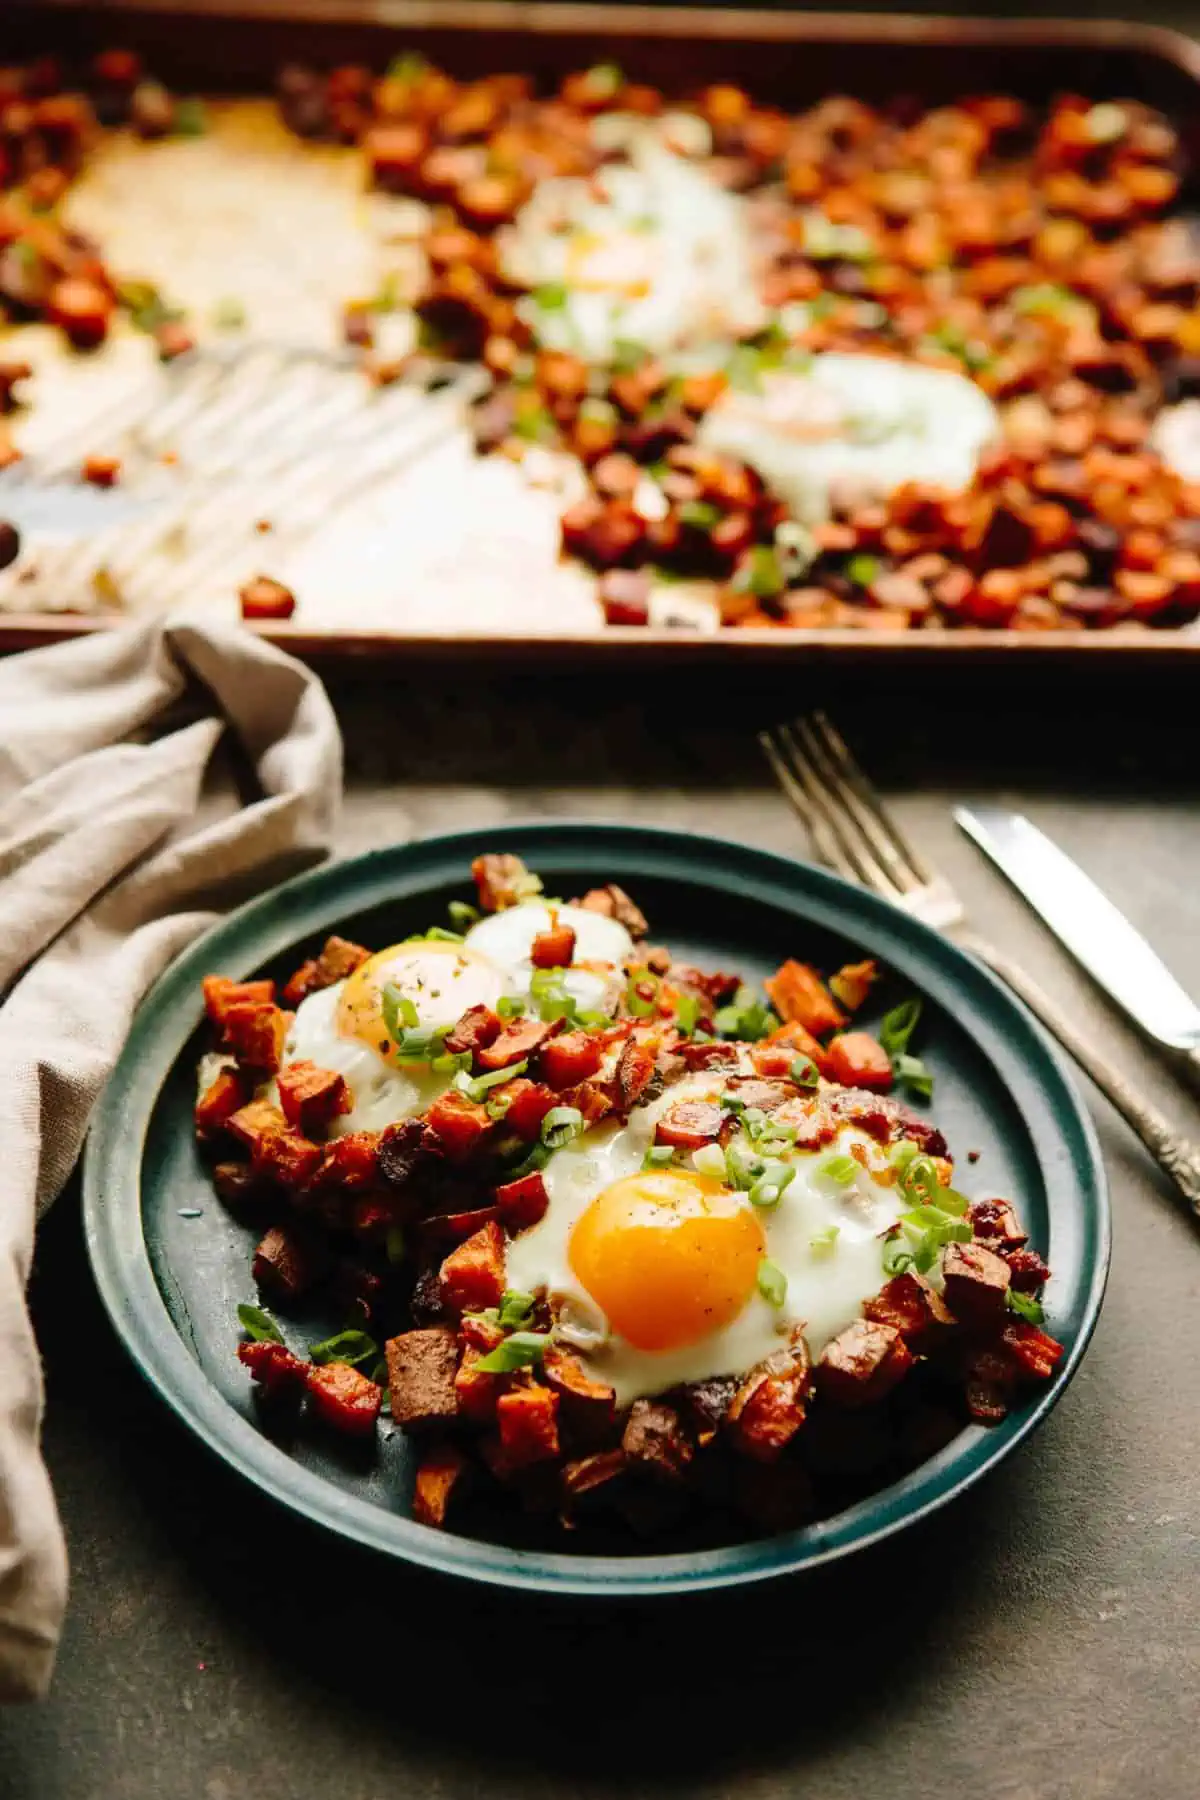 Angled shot of a dinner plate filled with sweet potato chorizo hash and runny eggs next to a baking sheet of more hash.